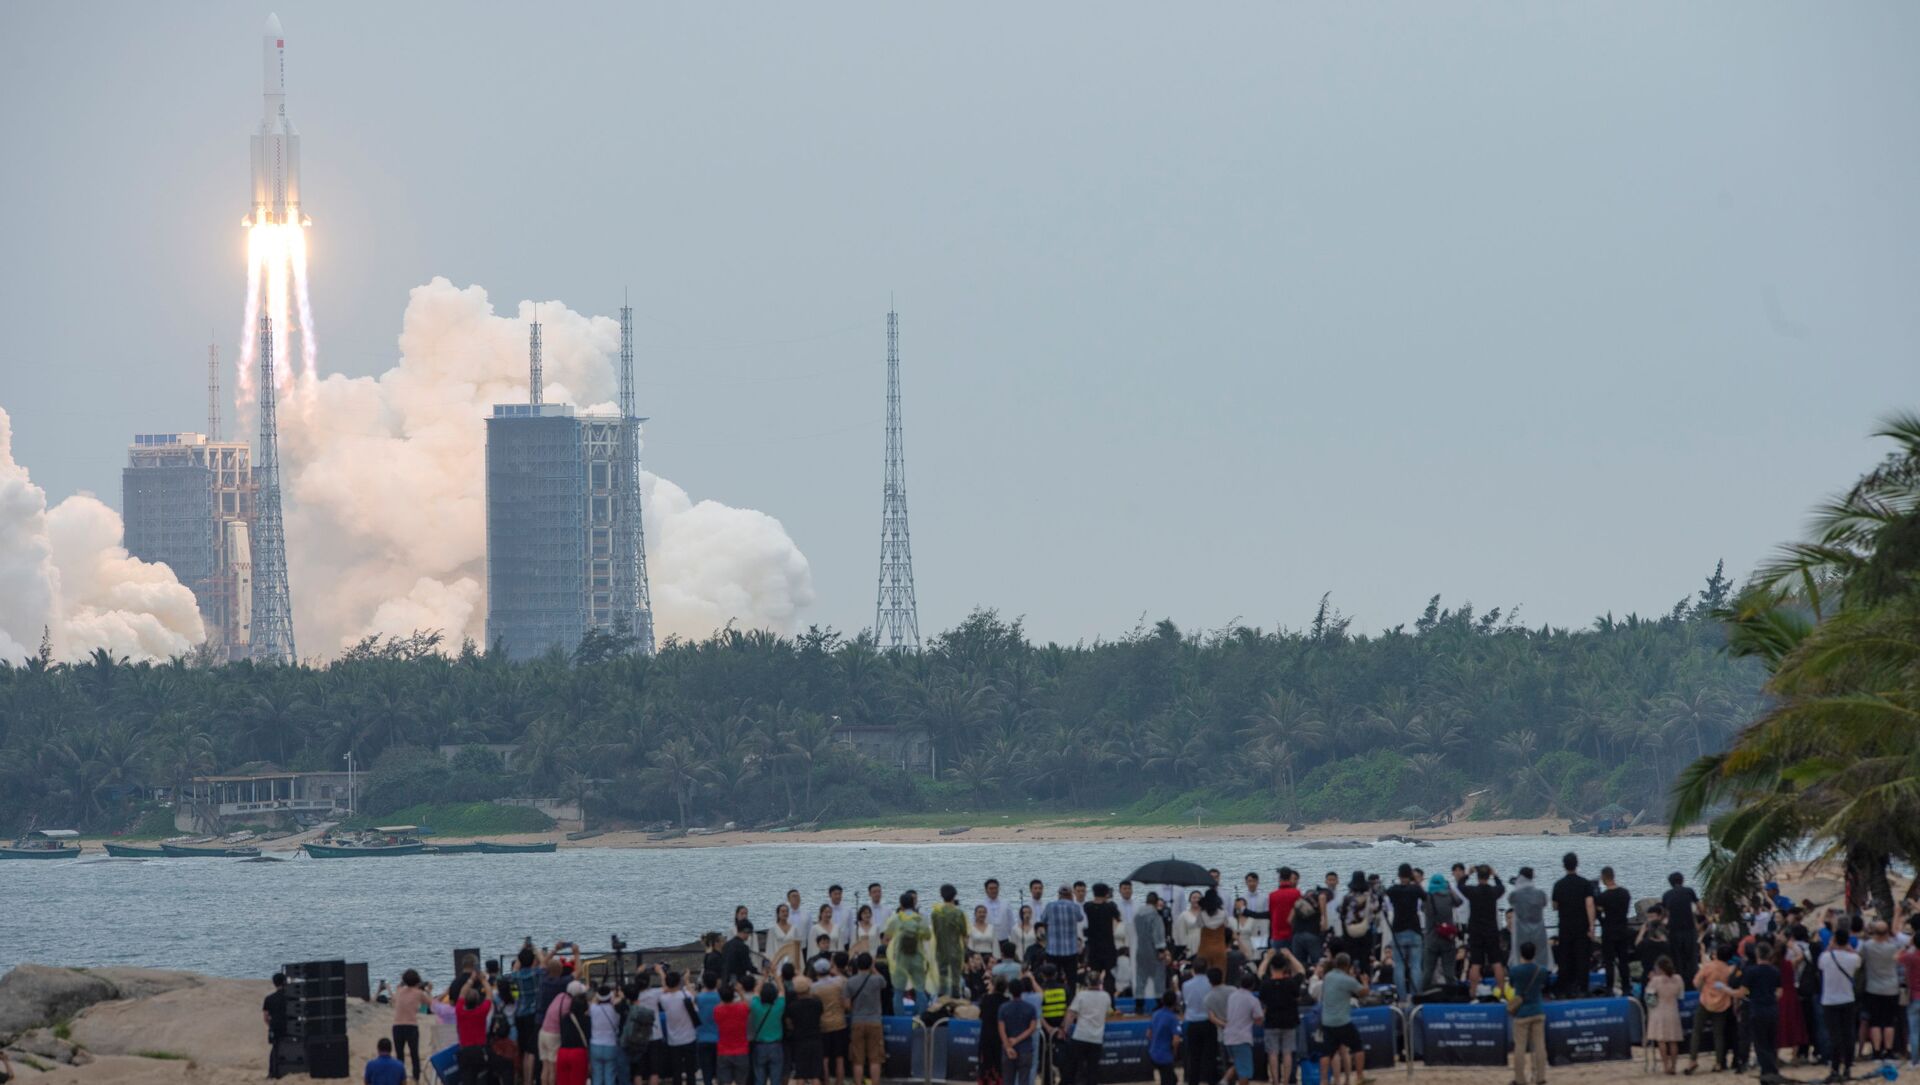 People watch from a beach as the Long March-5B Y2 rocket, carrying the core module of China's space station Tianhe, takes off from Wenchang Space Launch Center in Hainan province, China April 29, 2021. - Sputnik International, 1920, 07.05.2021